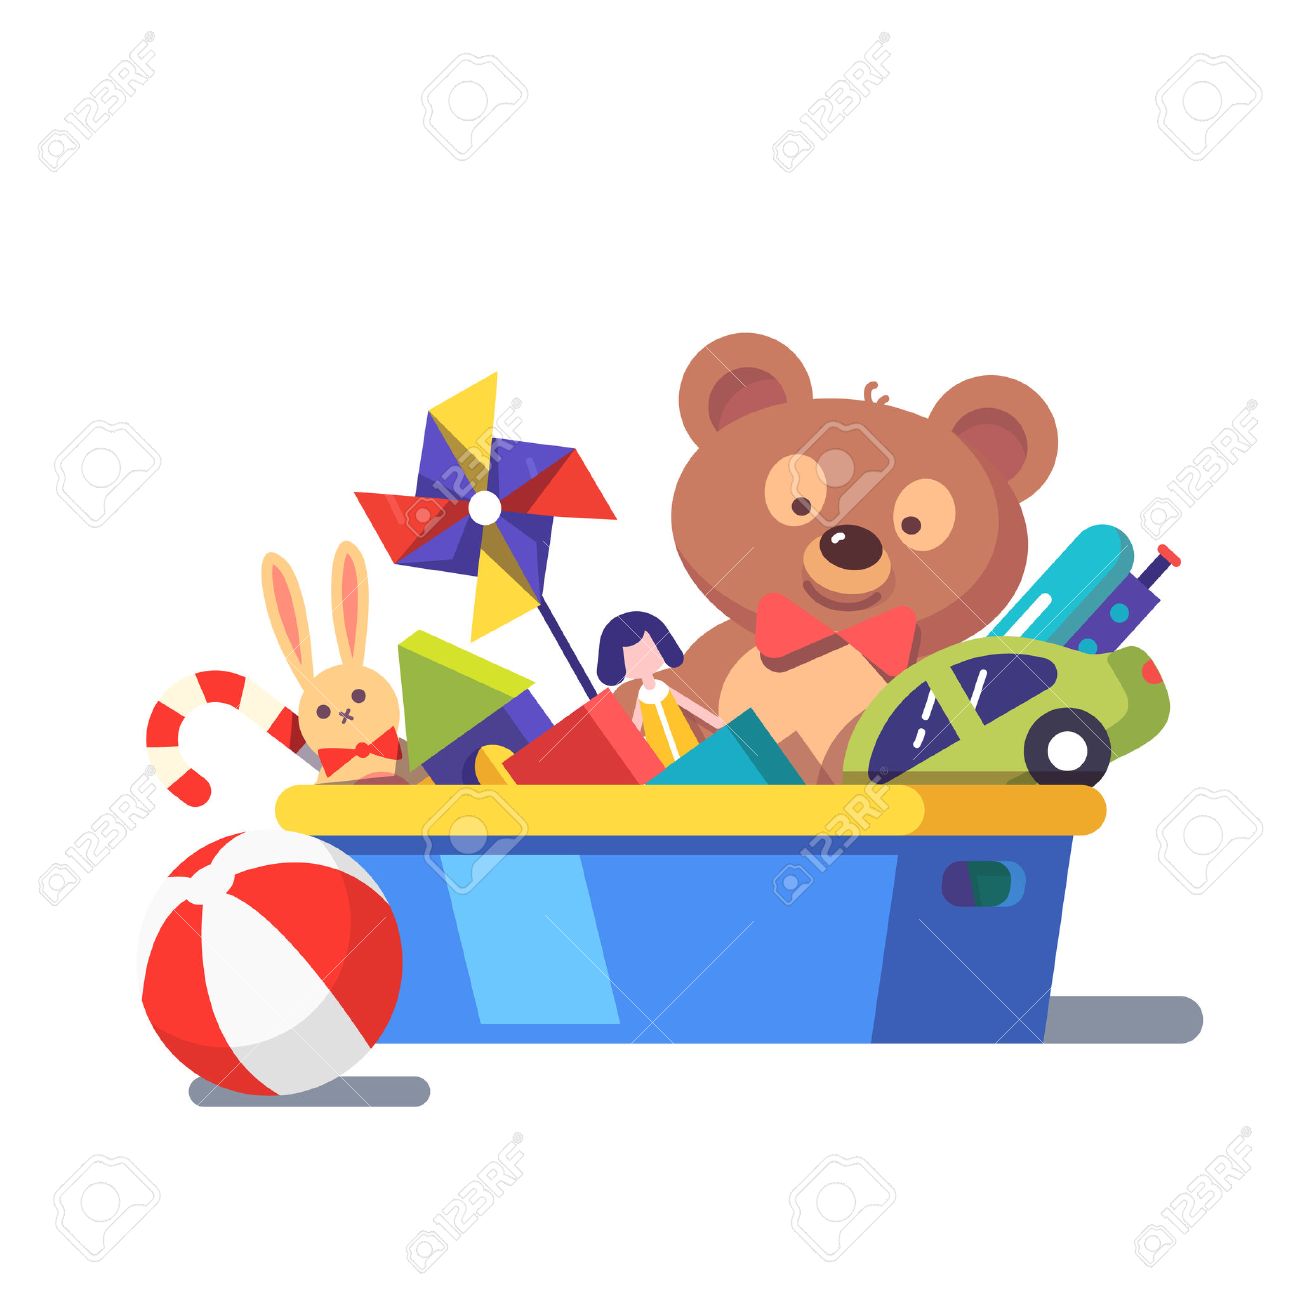 Box of toys clipart